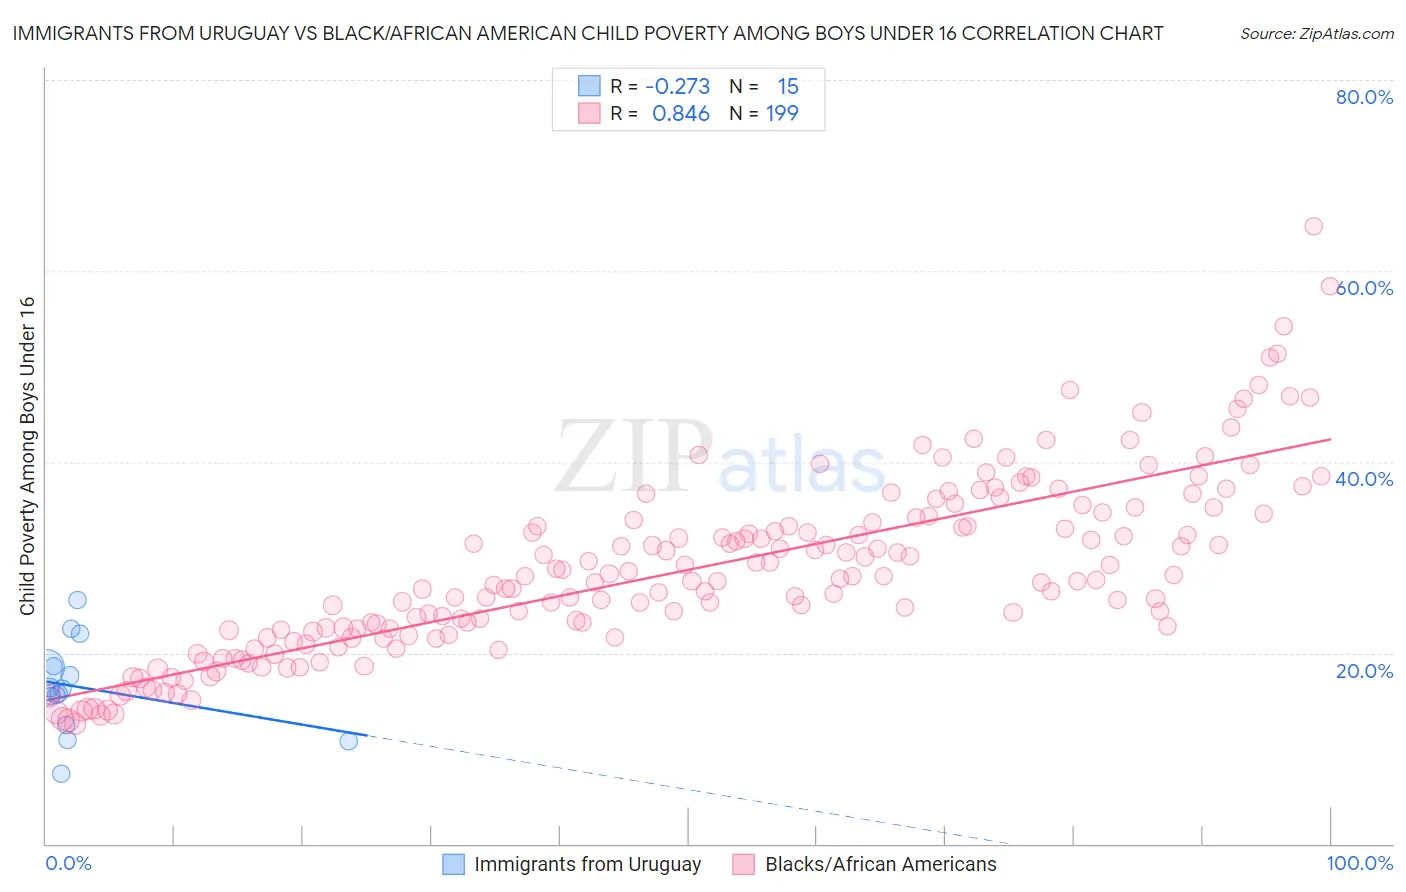 Immigrants from Uruguay vs Black/African American Child Poverty Among Boys Under 16